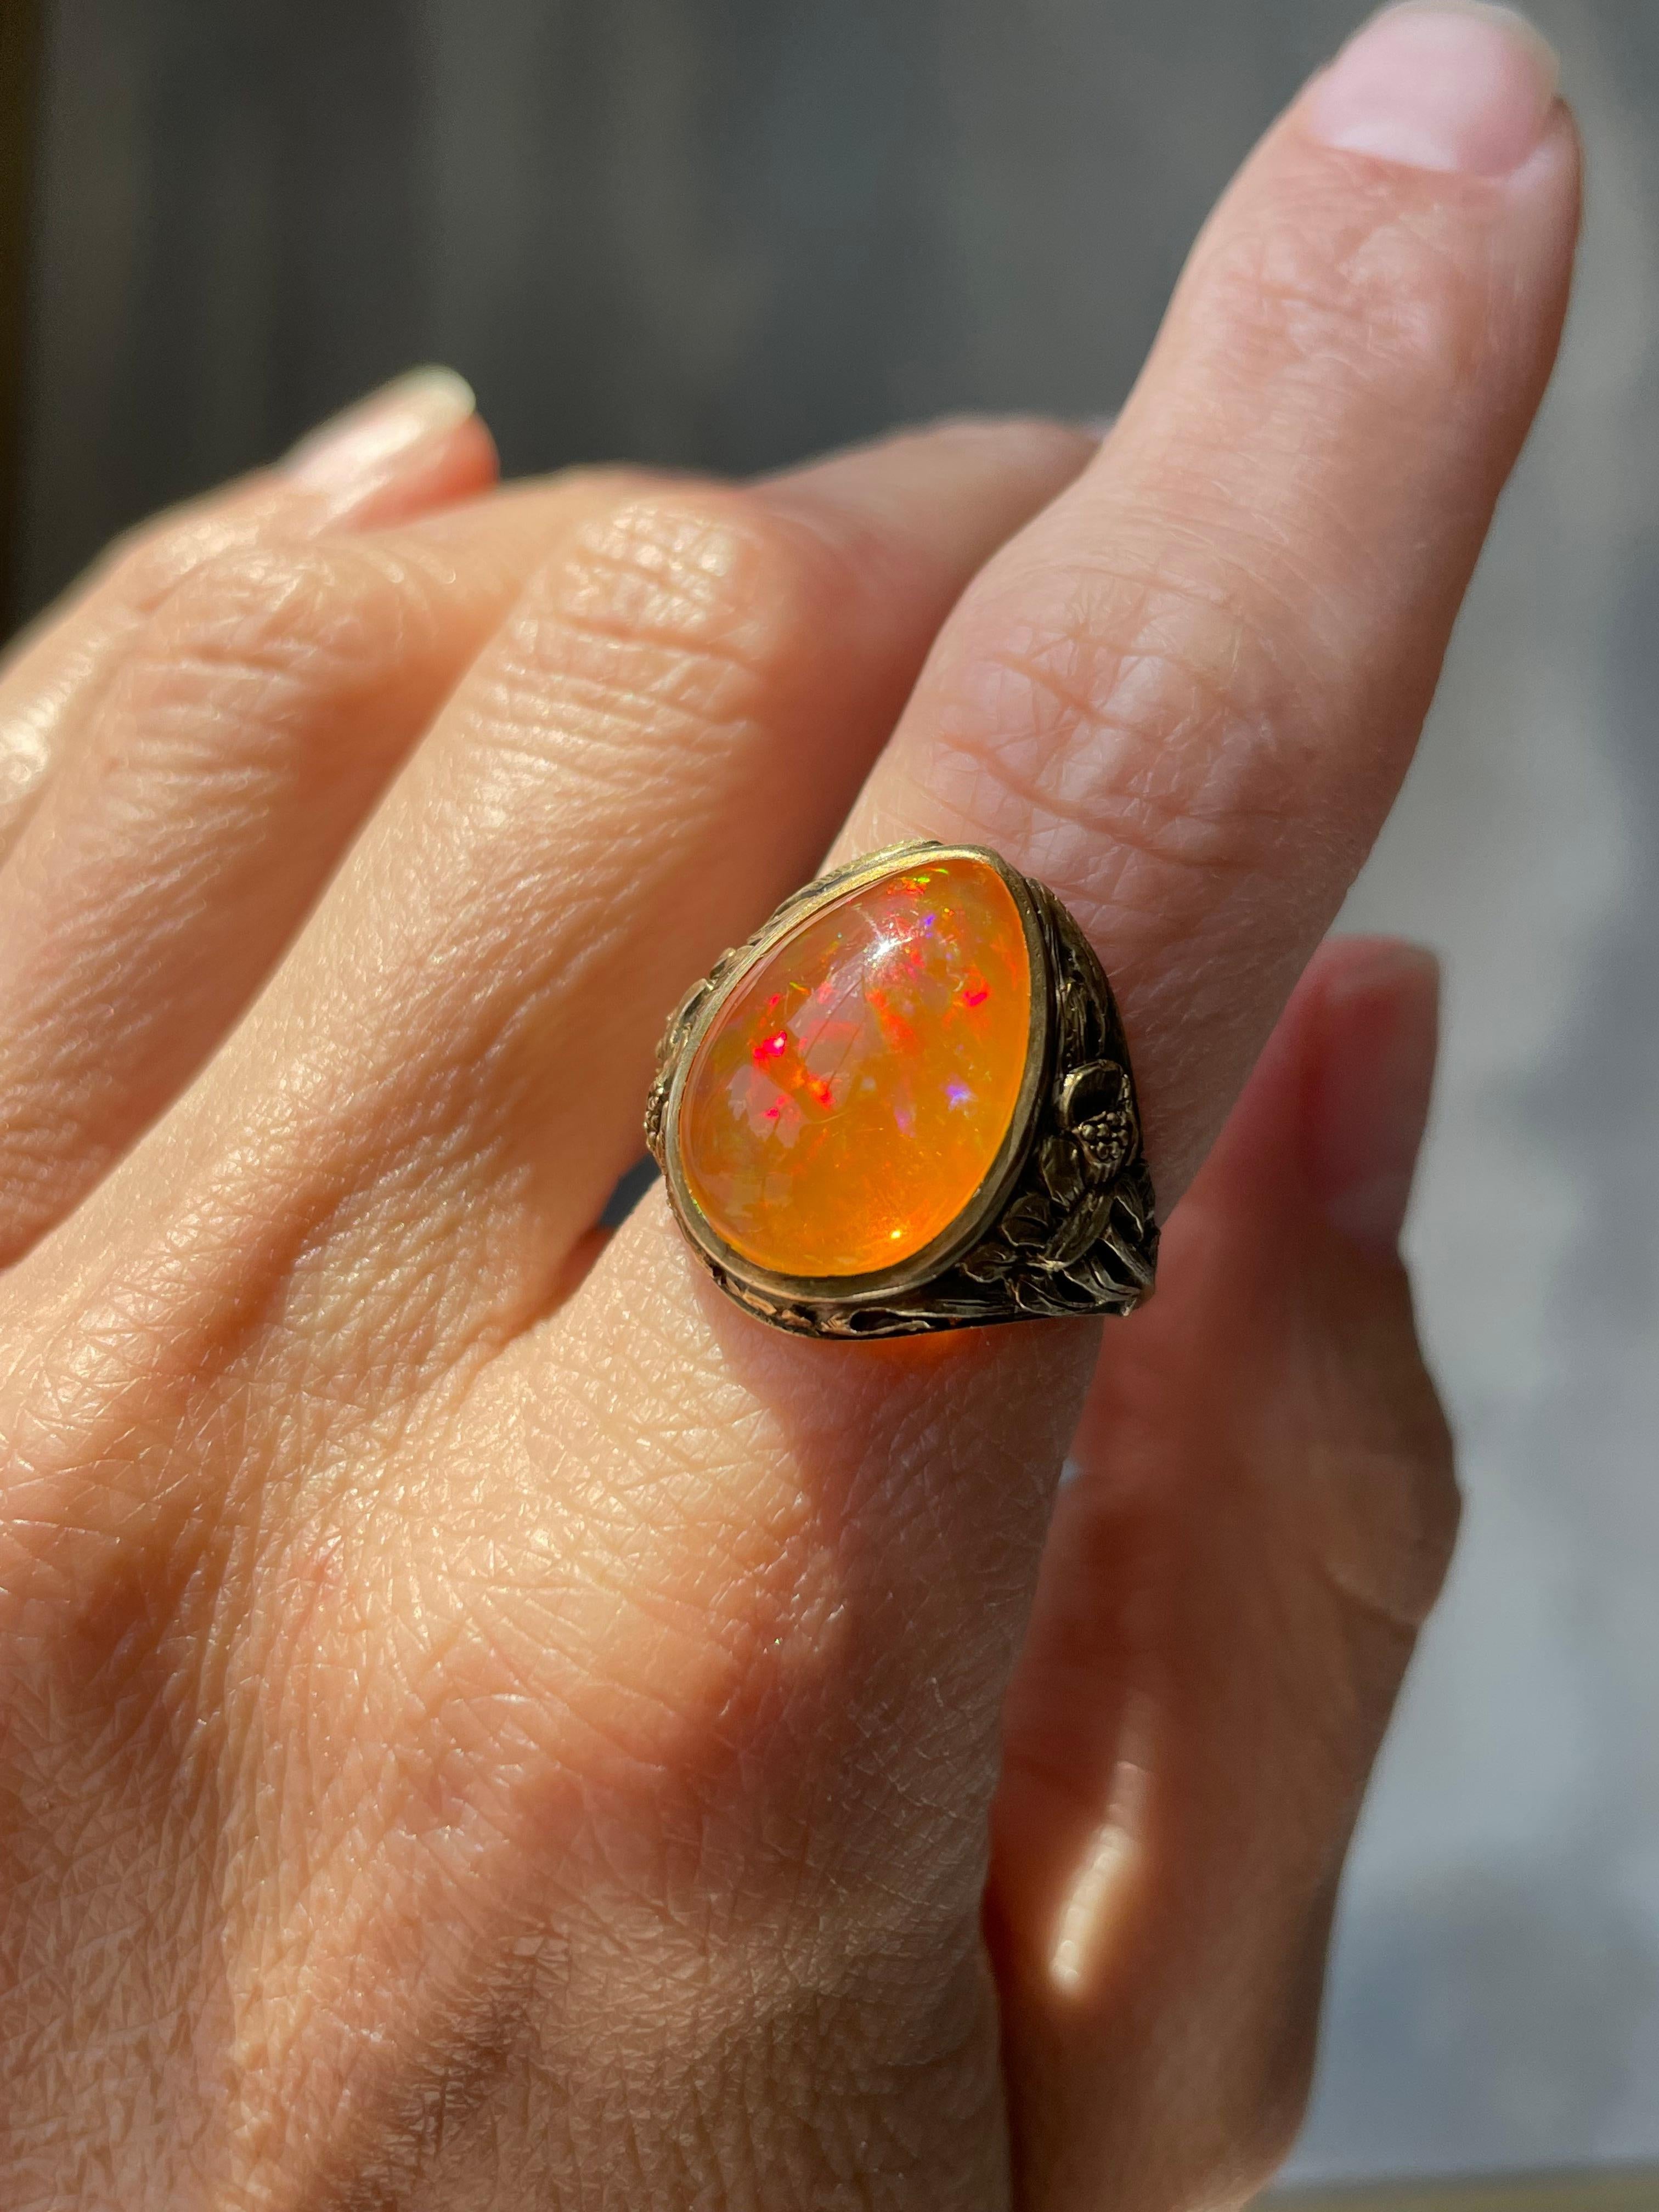 Dating from the early 20th century, this ravishing Art Nouveau ring centers on a glowing Mexican opal filled with confetti-like flashes of bright yellow, vibrant red, brilliant blue and neon green. The opal is perfectly presented in a sculpted 14k